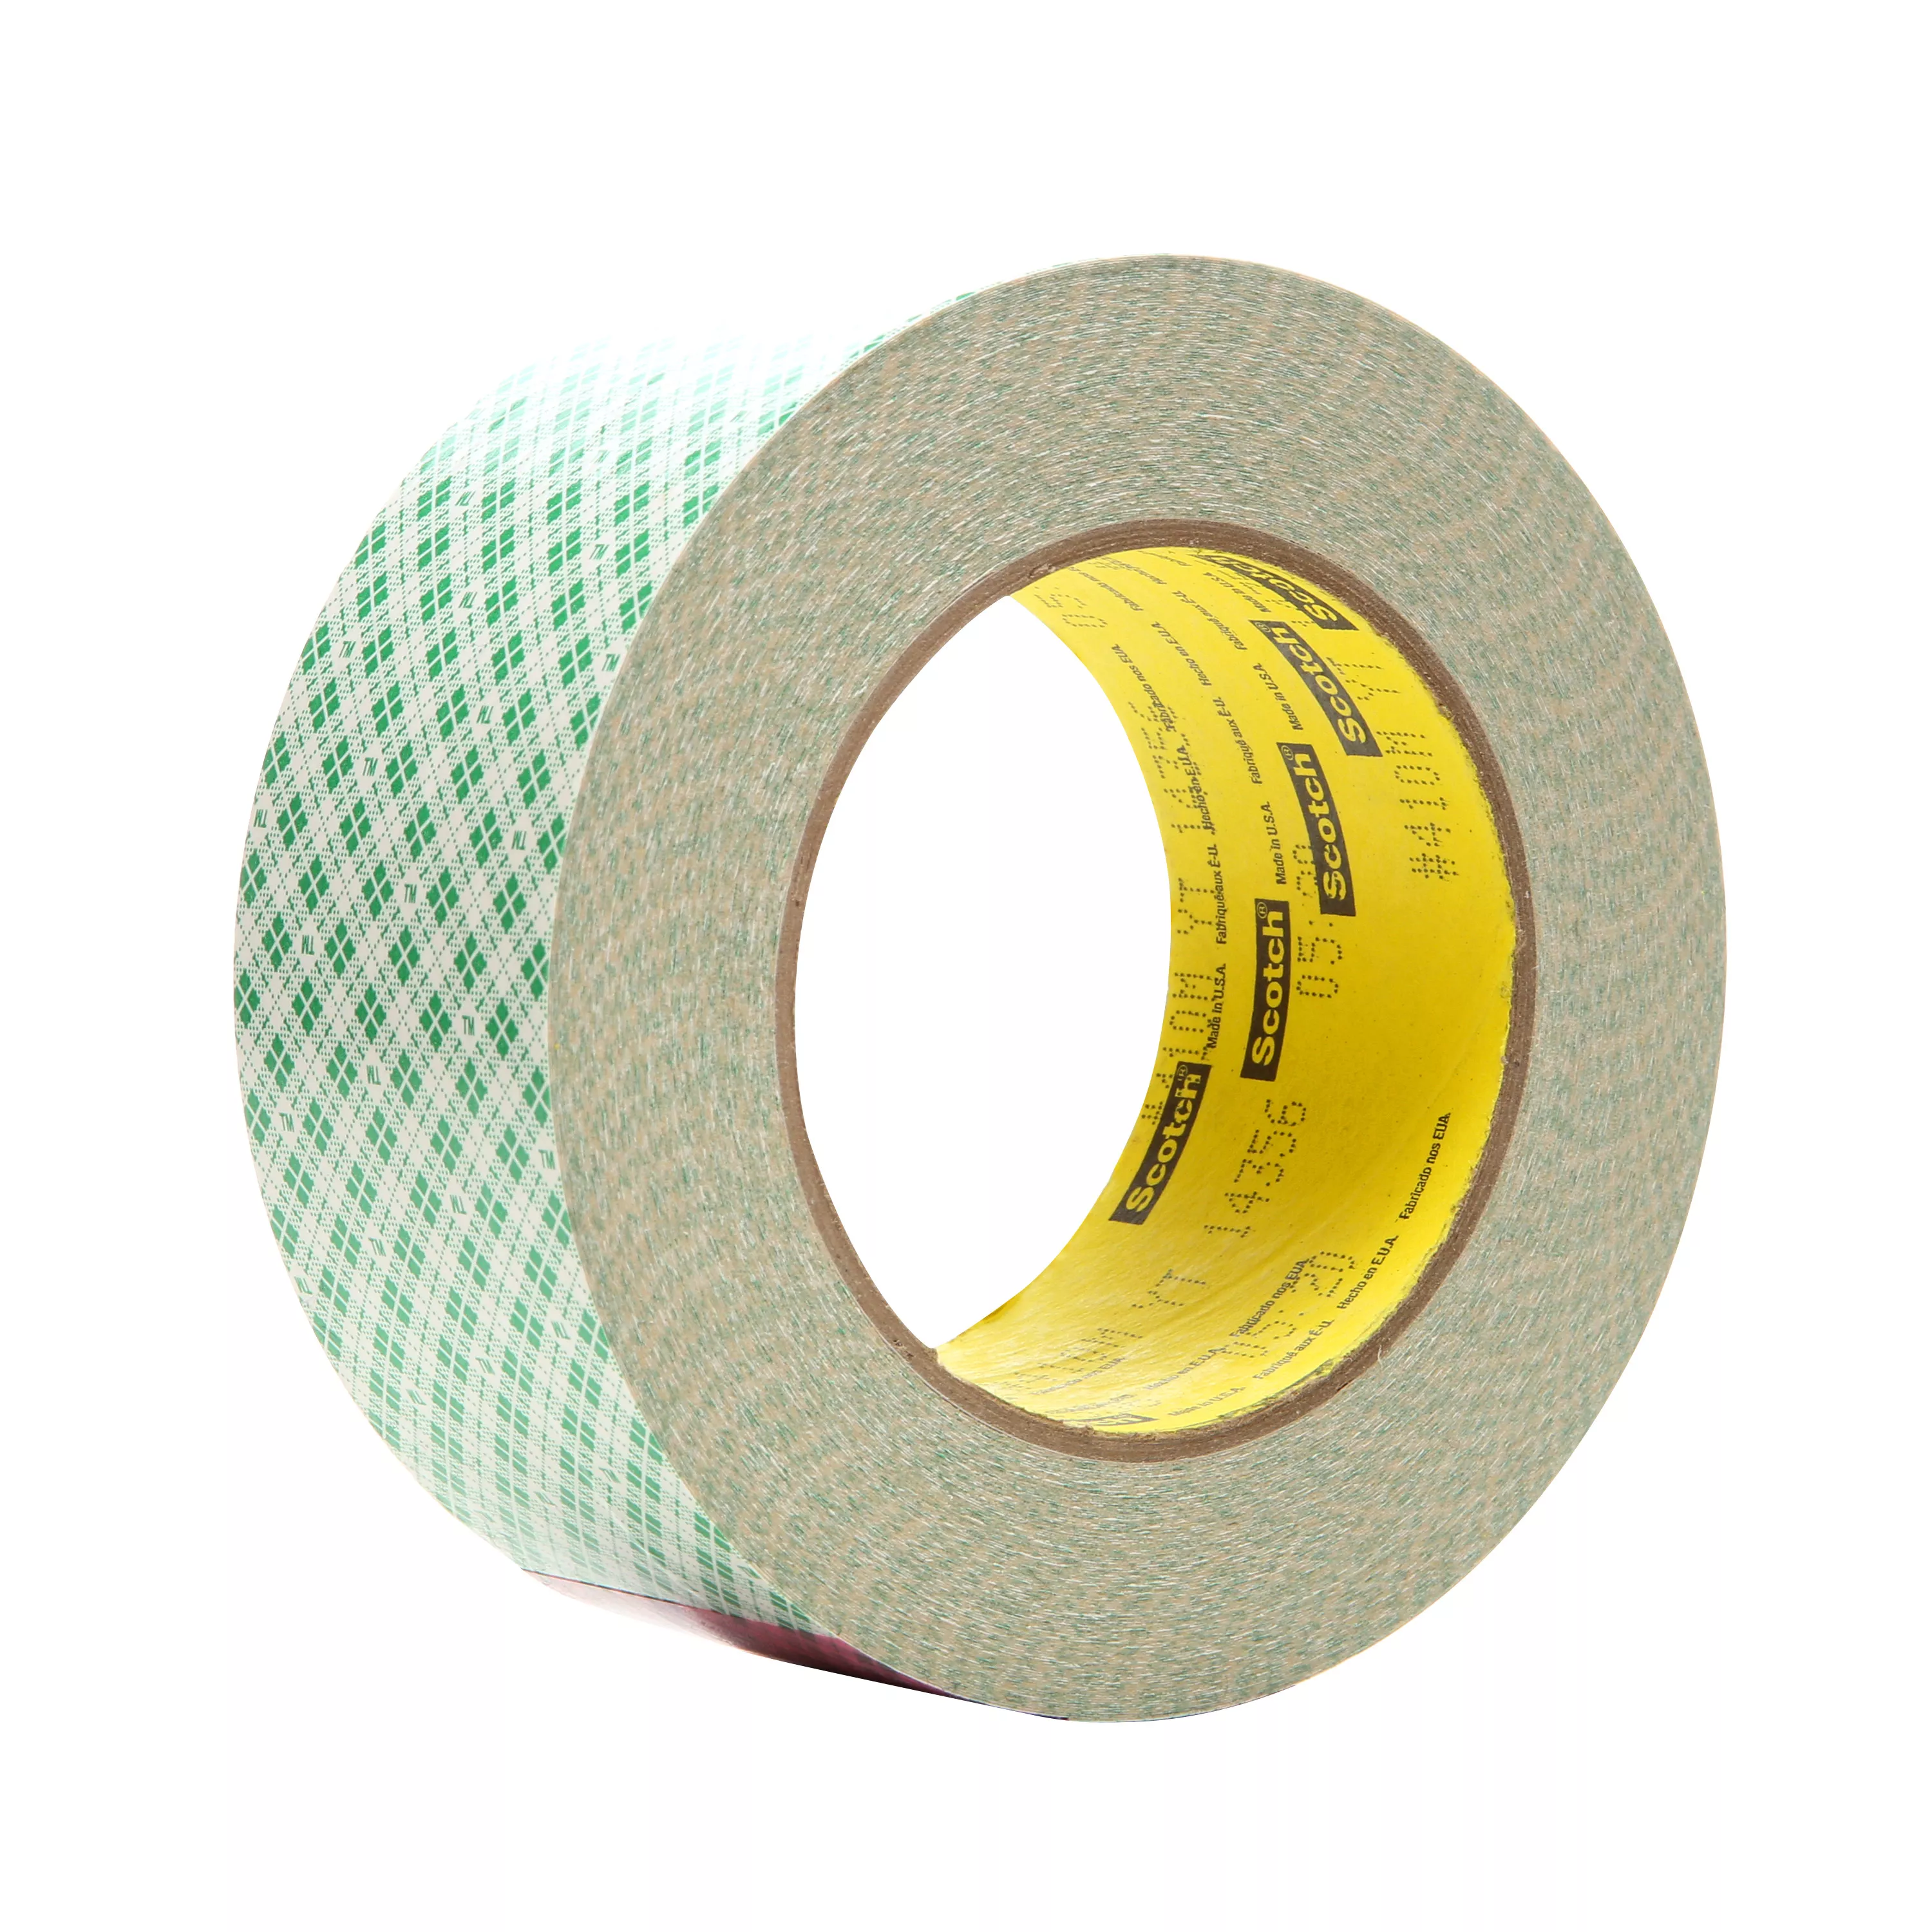 SKU 7010300259 | 3M™ Double Coated Paper Tape 410M